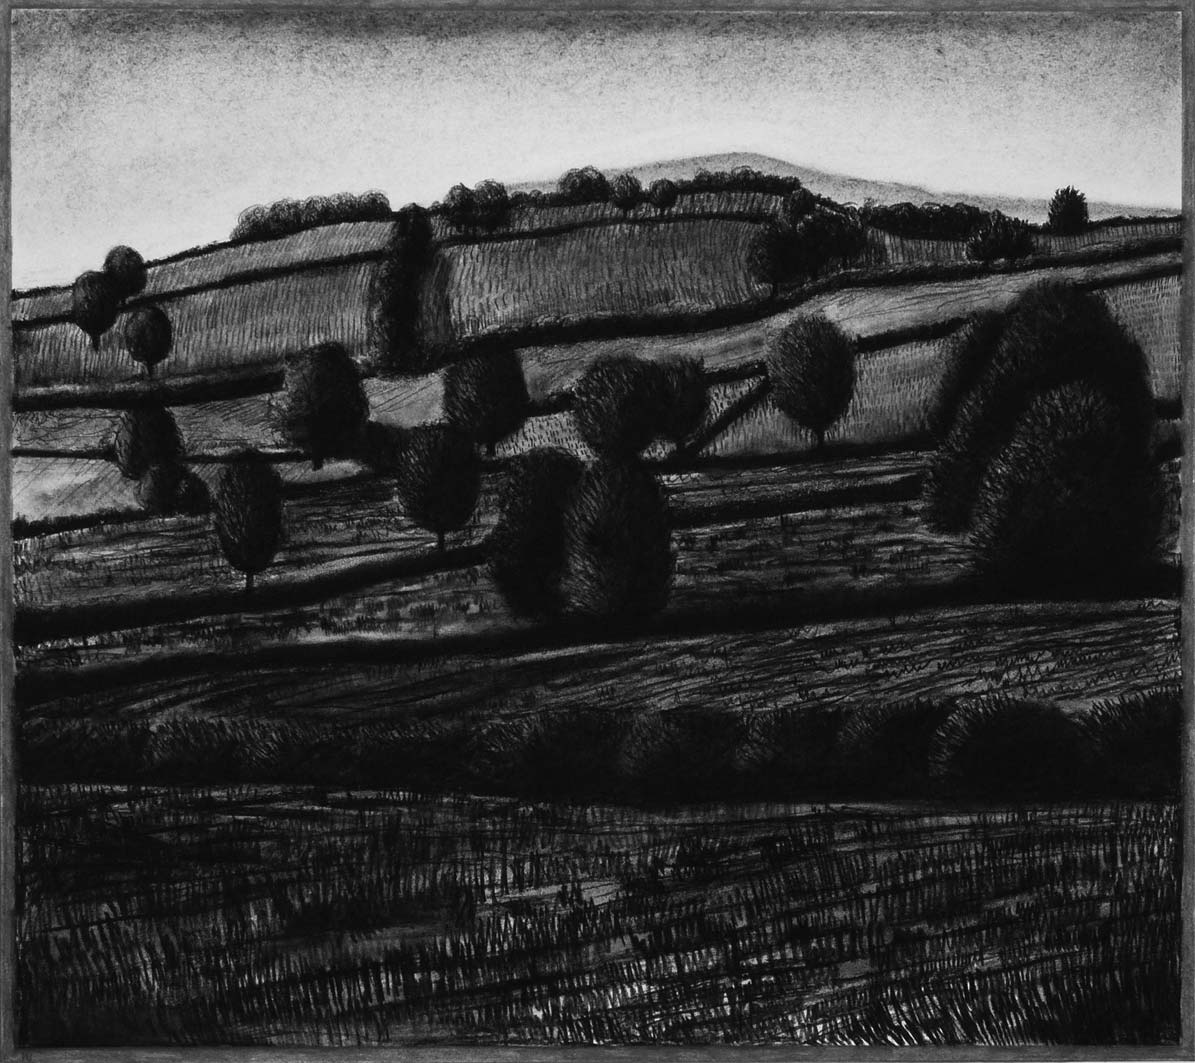 Fields and Trees, charcoal & conte, private collection